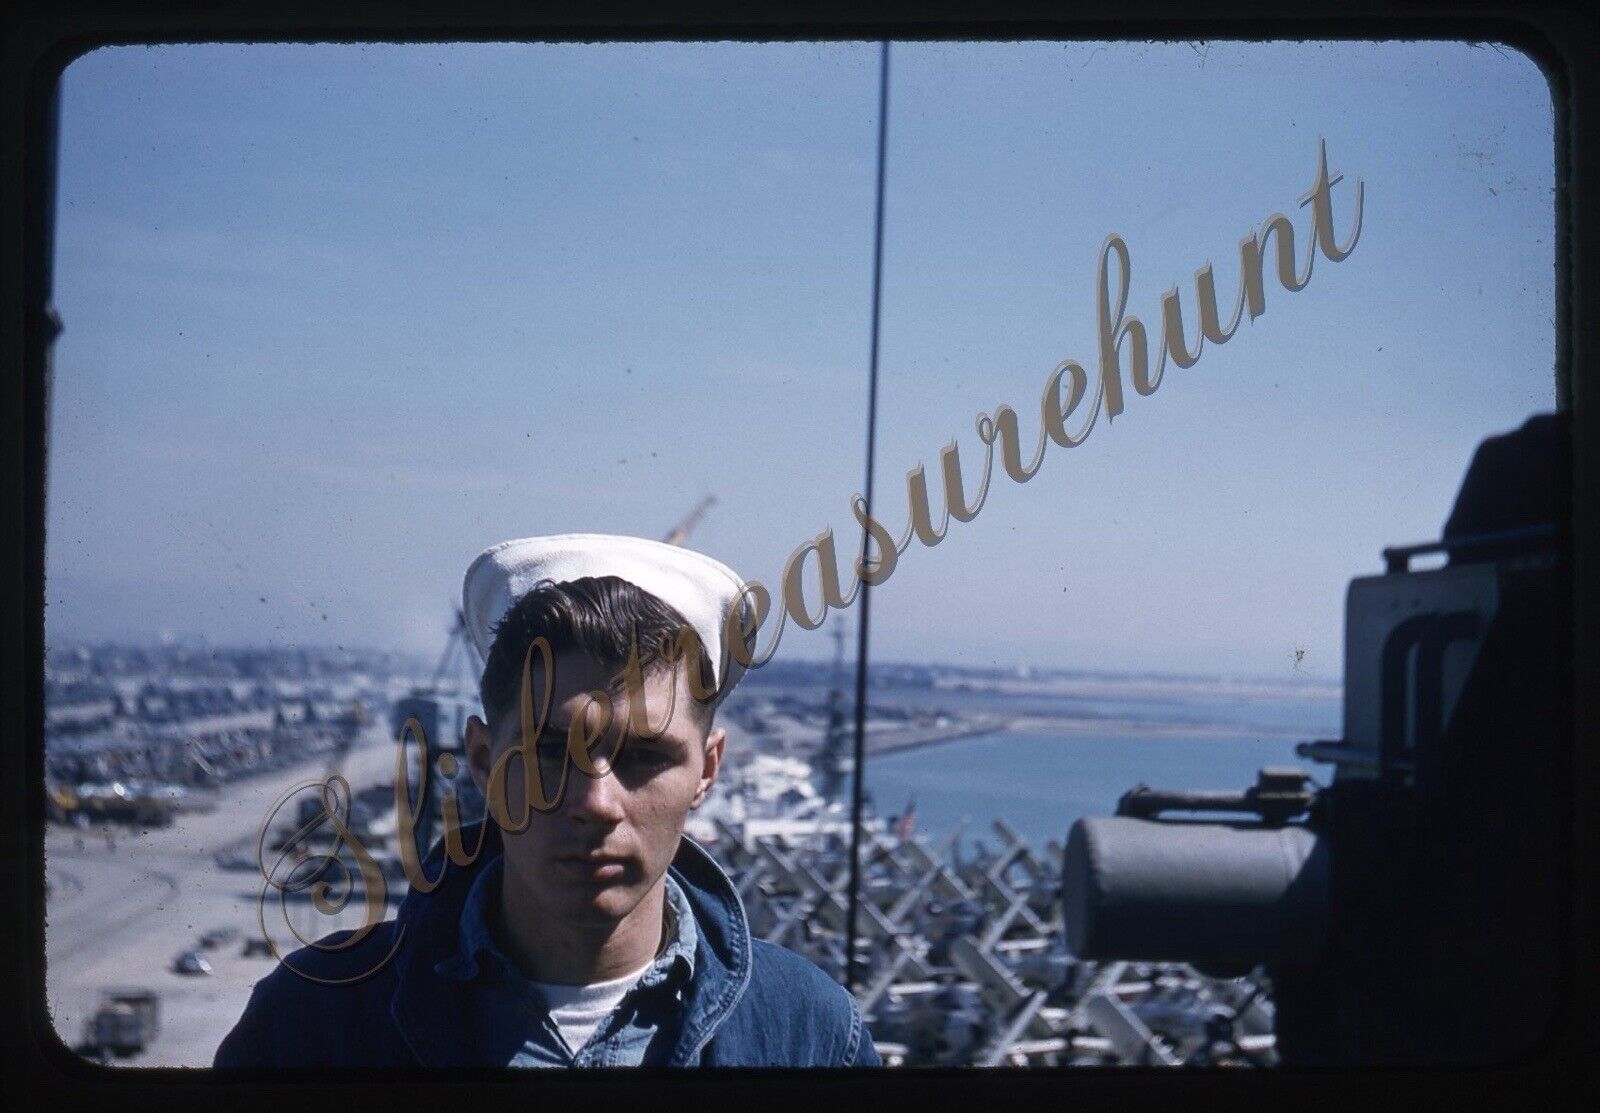 Handsome Man Military Aircraft Carrier 35mm Slide 1950s Red Border Kodachrome